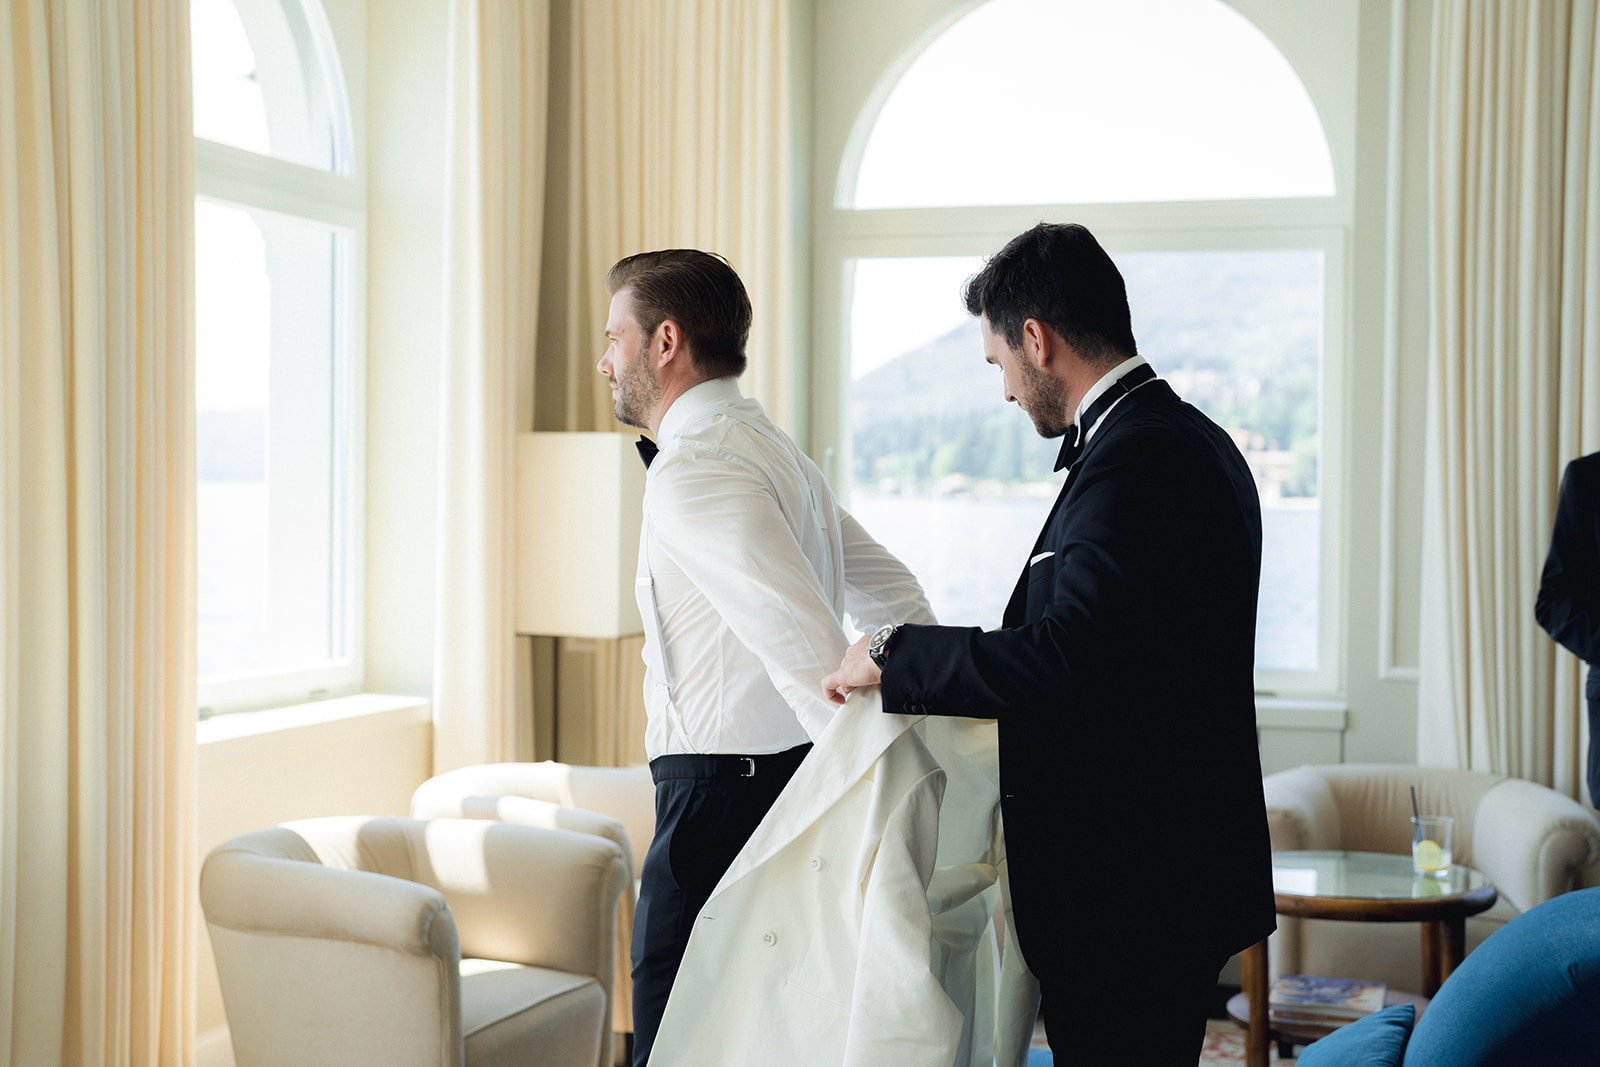 The groomsman helps the groom put on the white jacket of the tuxedo for his wedding